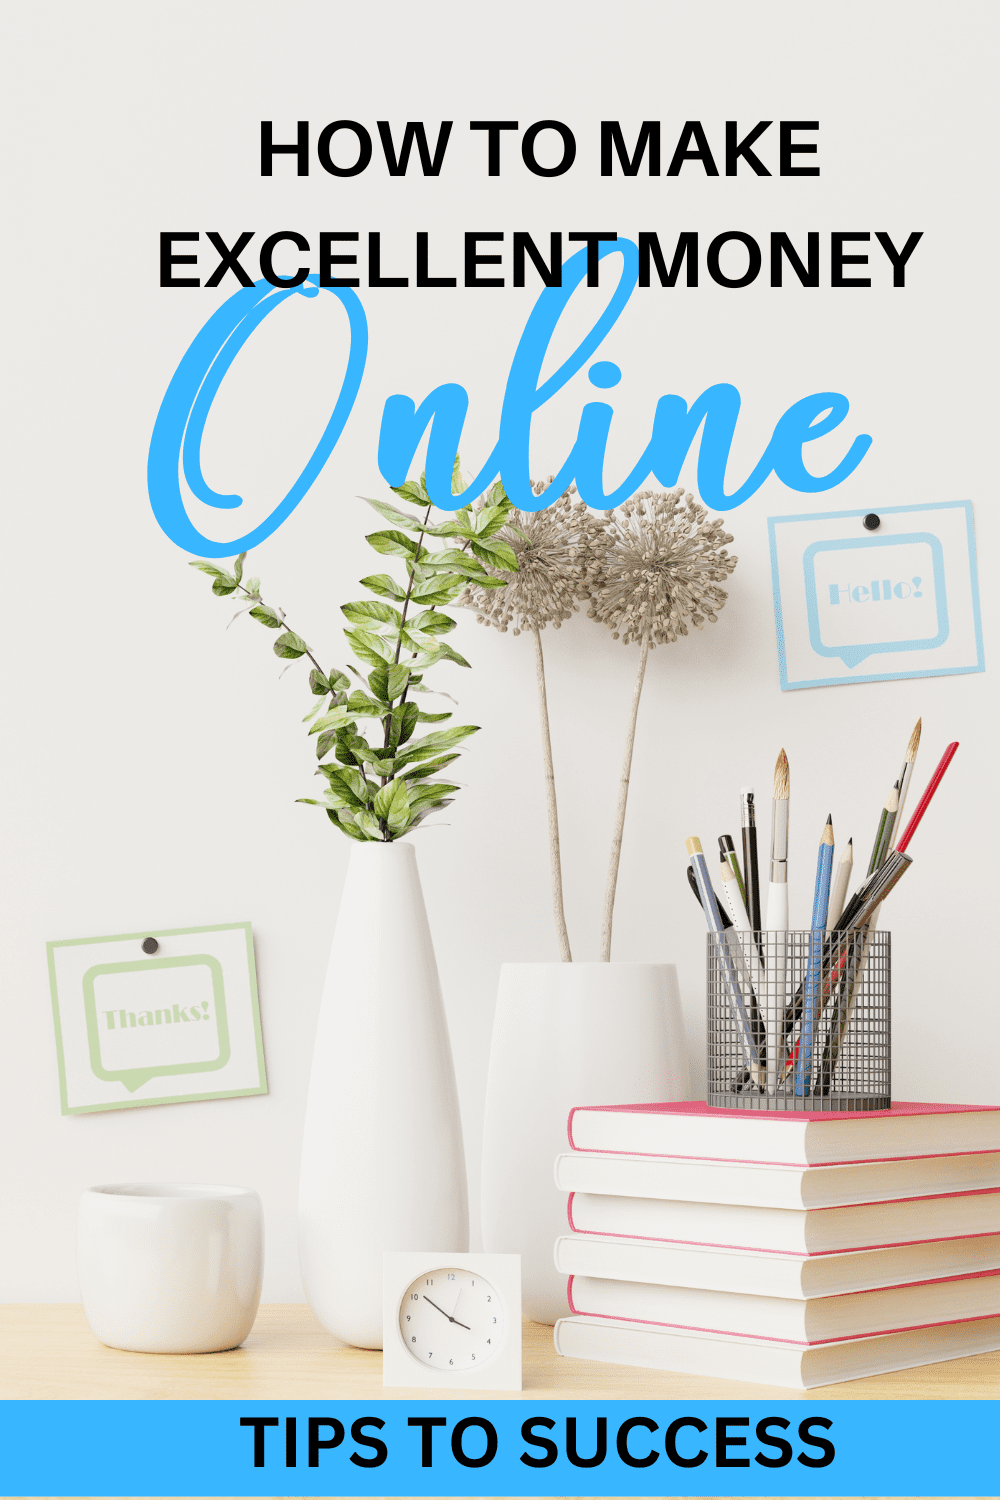 02 How to make excellent money online